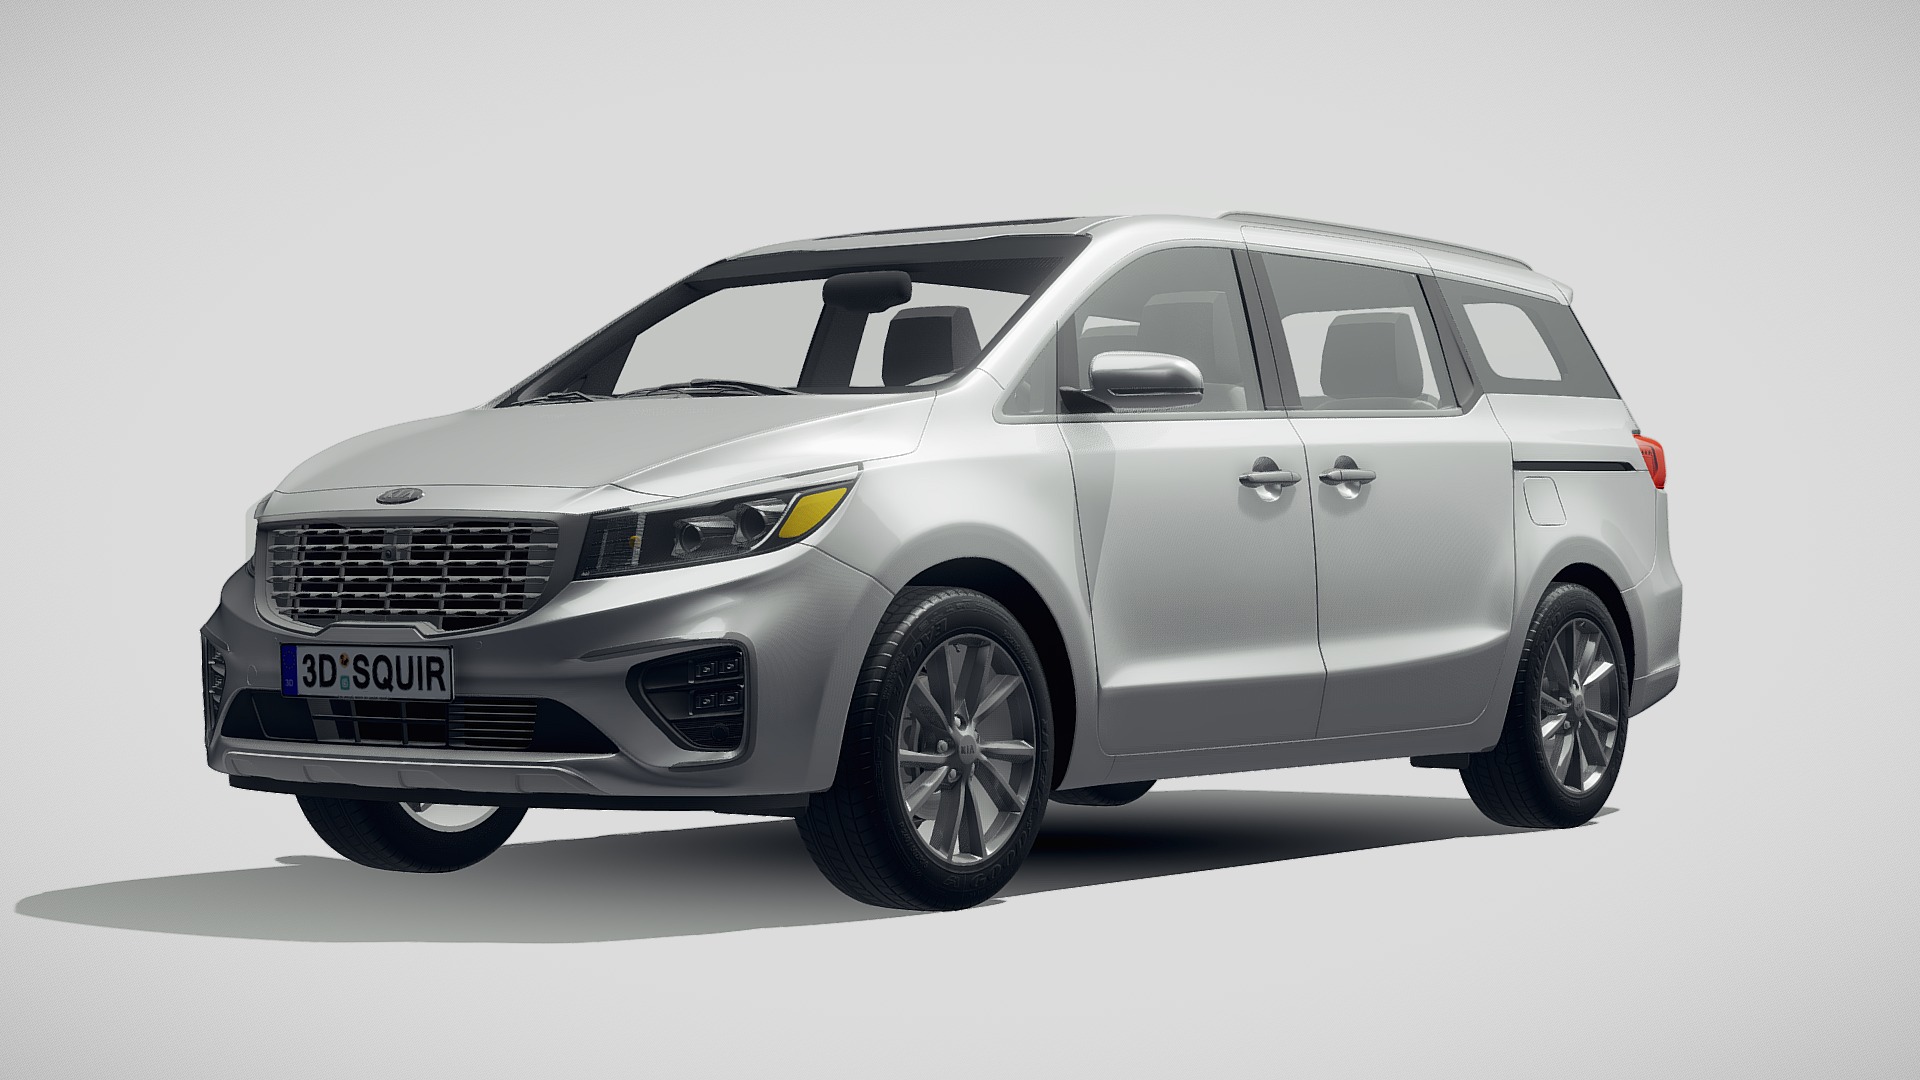 3D model Kia Sedona 2019 - This is a 3D model of the Kia Sedona 2019. The 3D model is about a silver car with a black background with Holden Arboretum in the background.